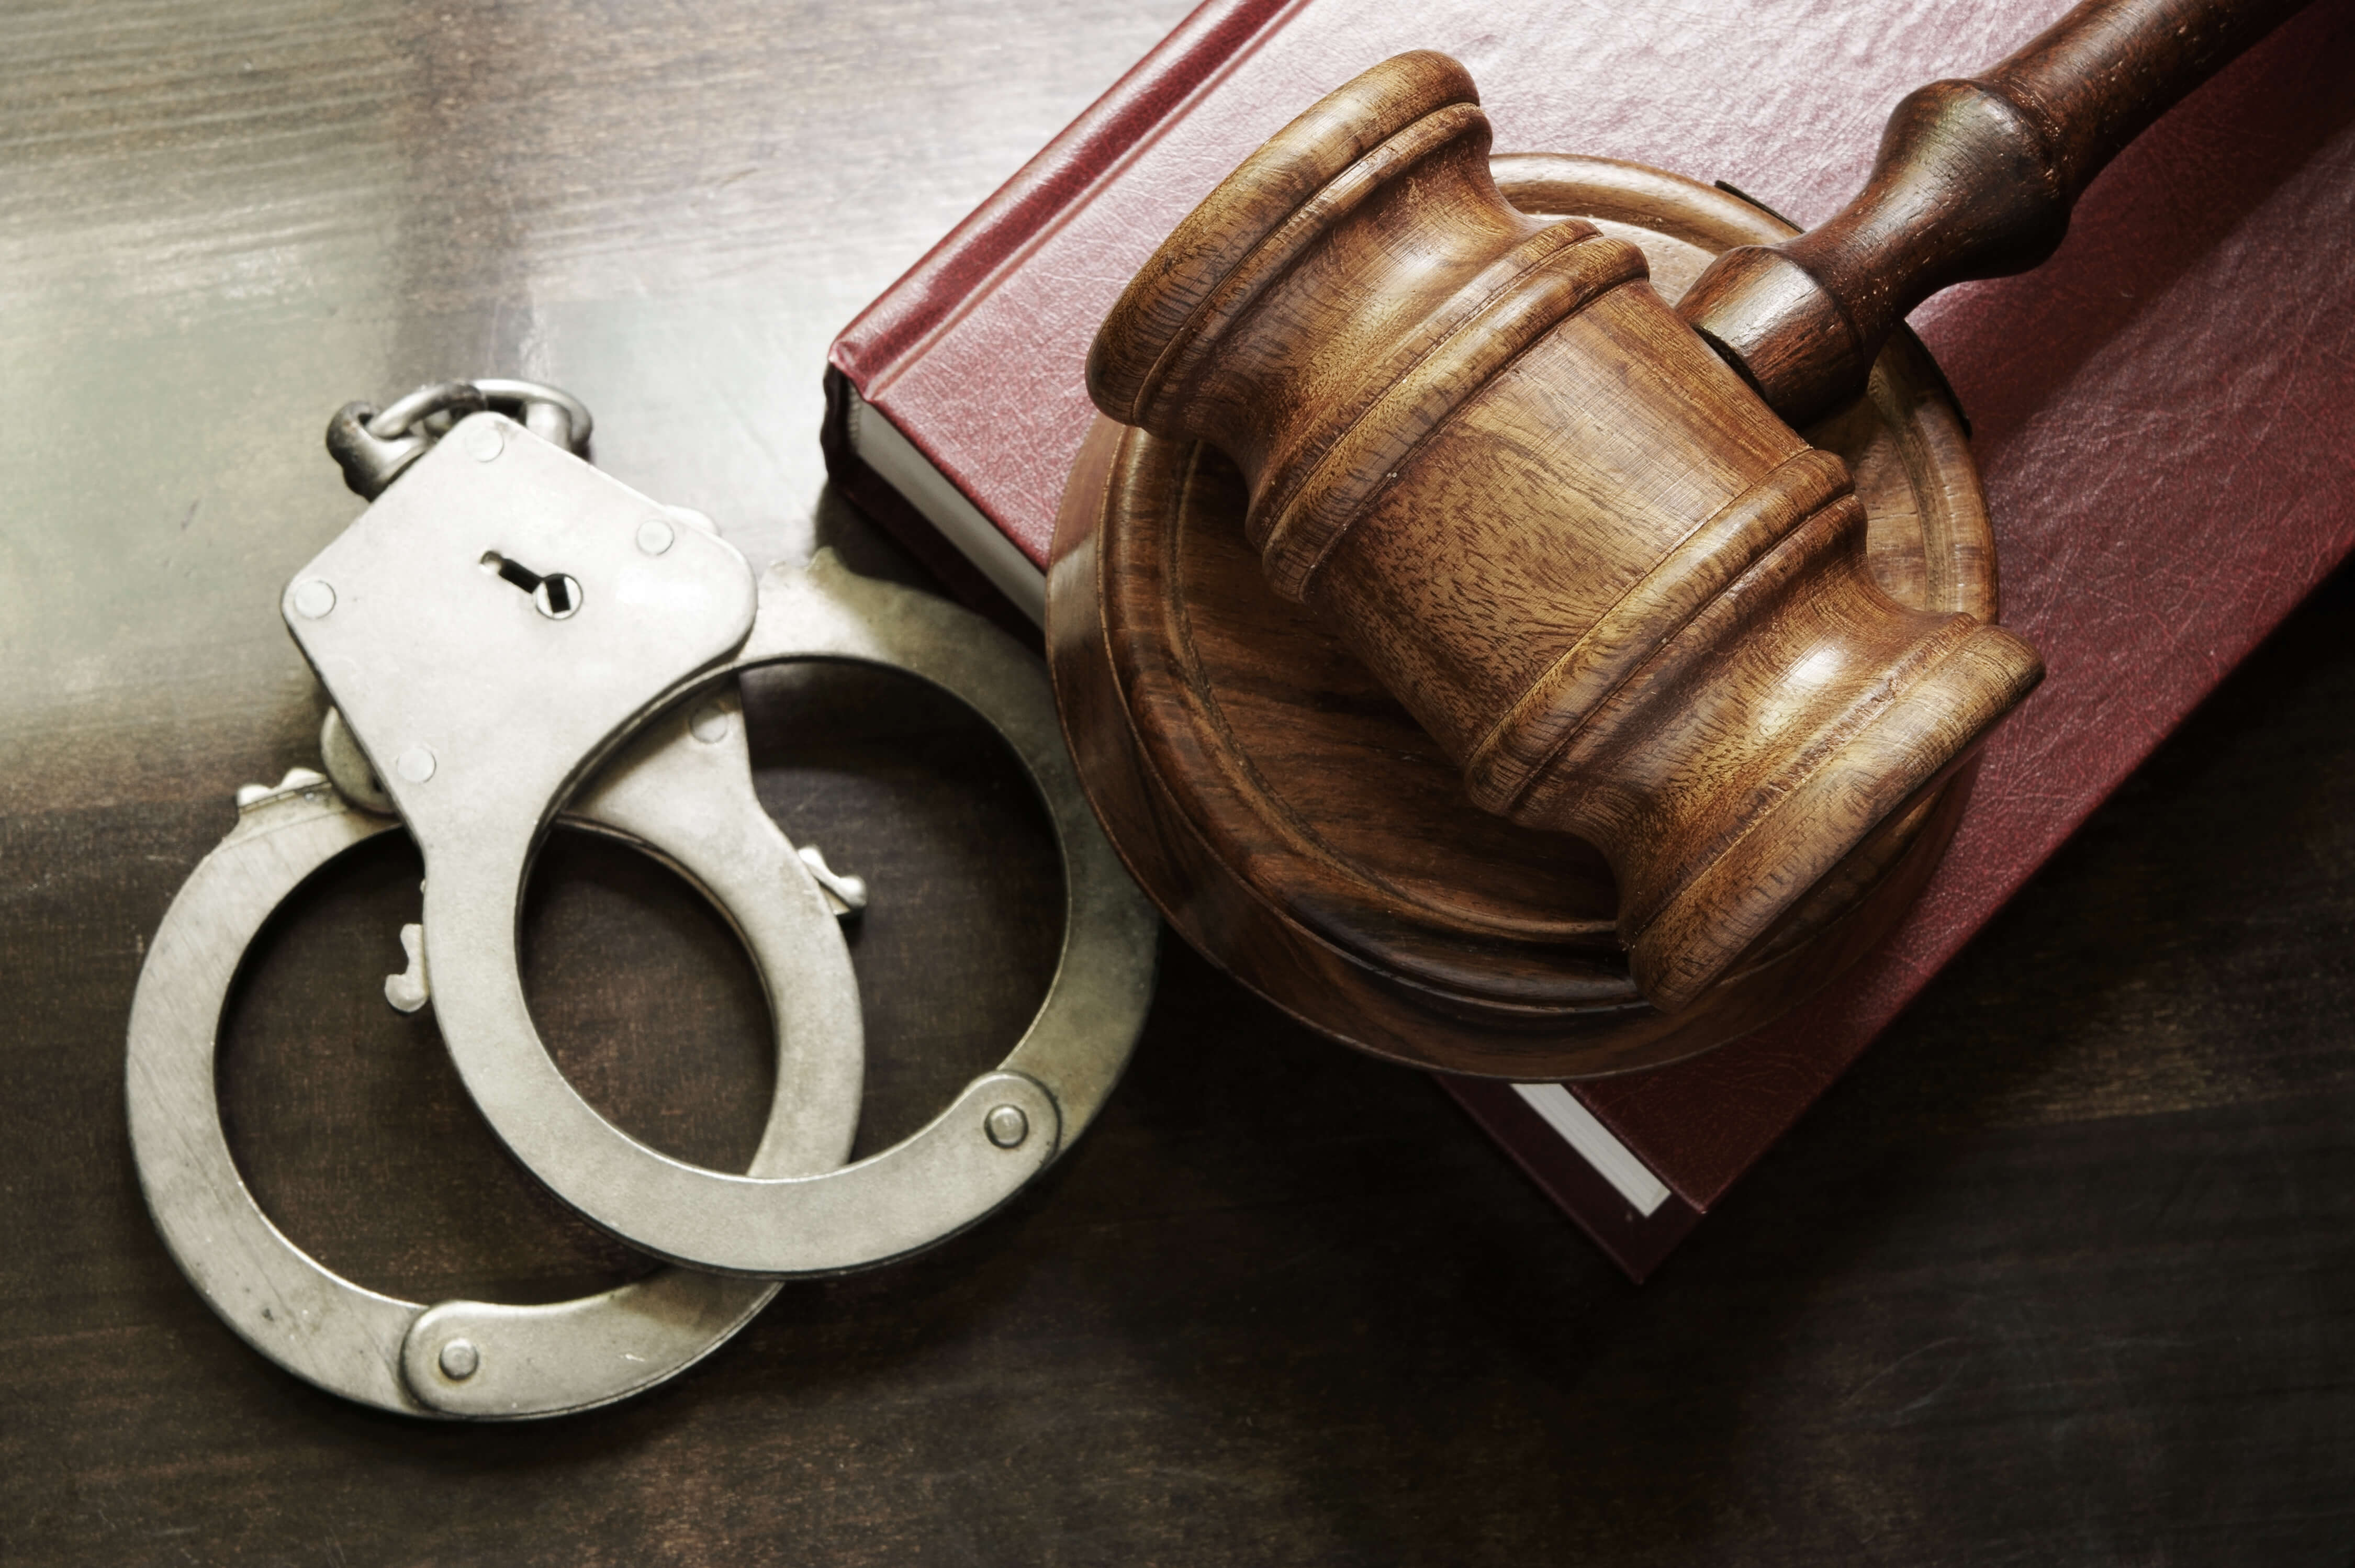 Virginia Criminal Law – Learn About Misdemeanors, the Statute of Limitations for a Felony, and Expungement